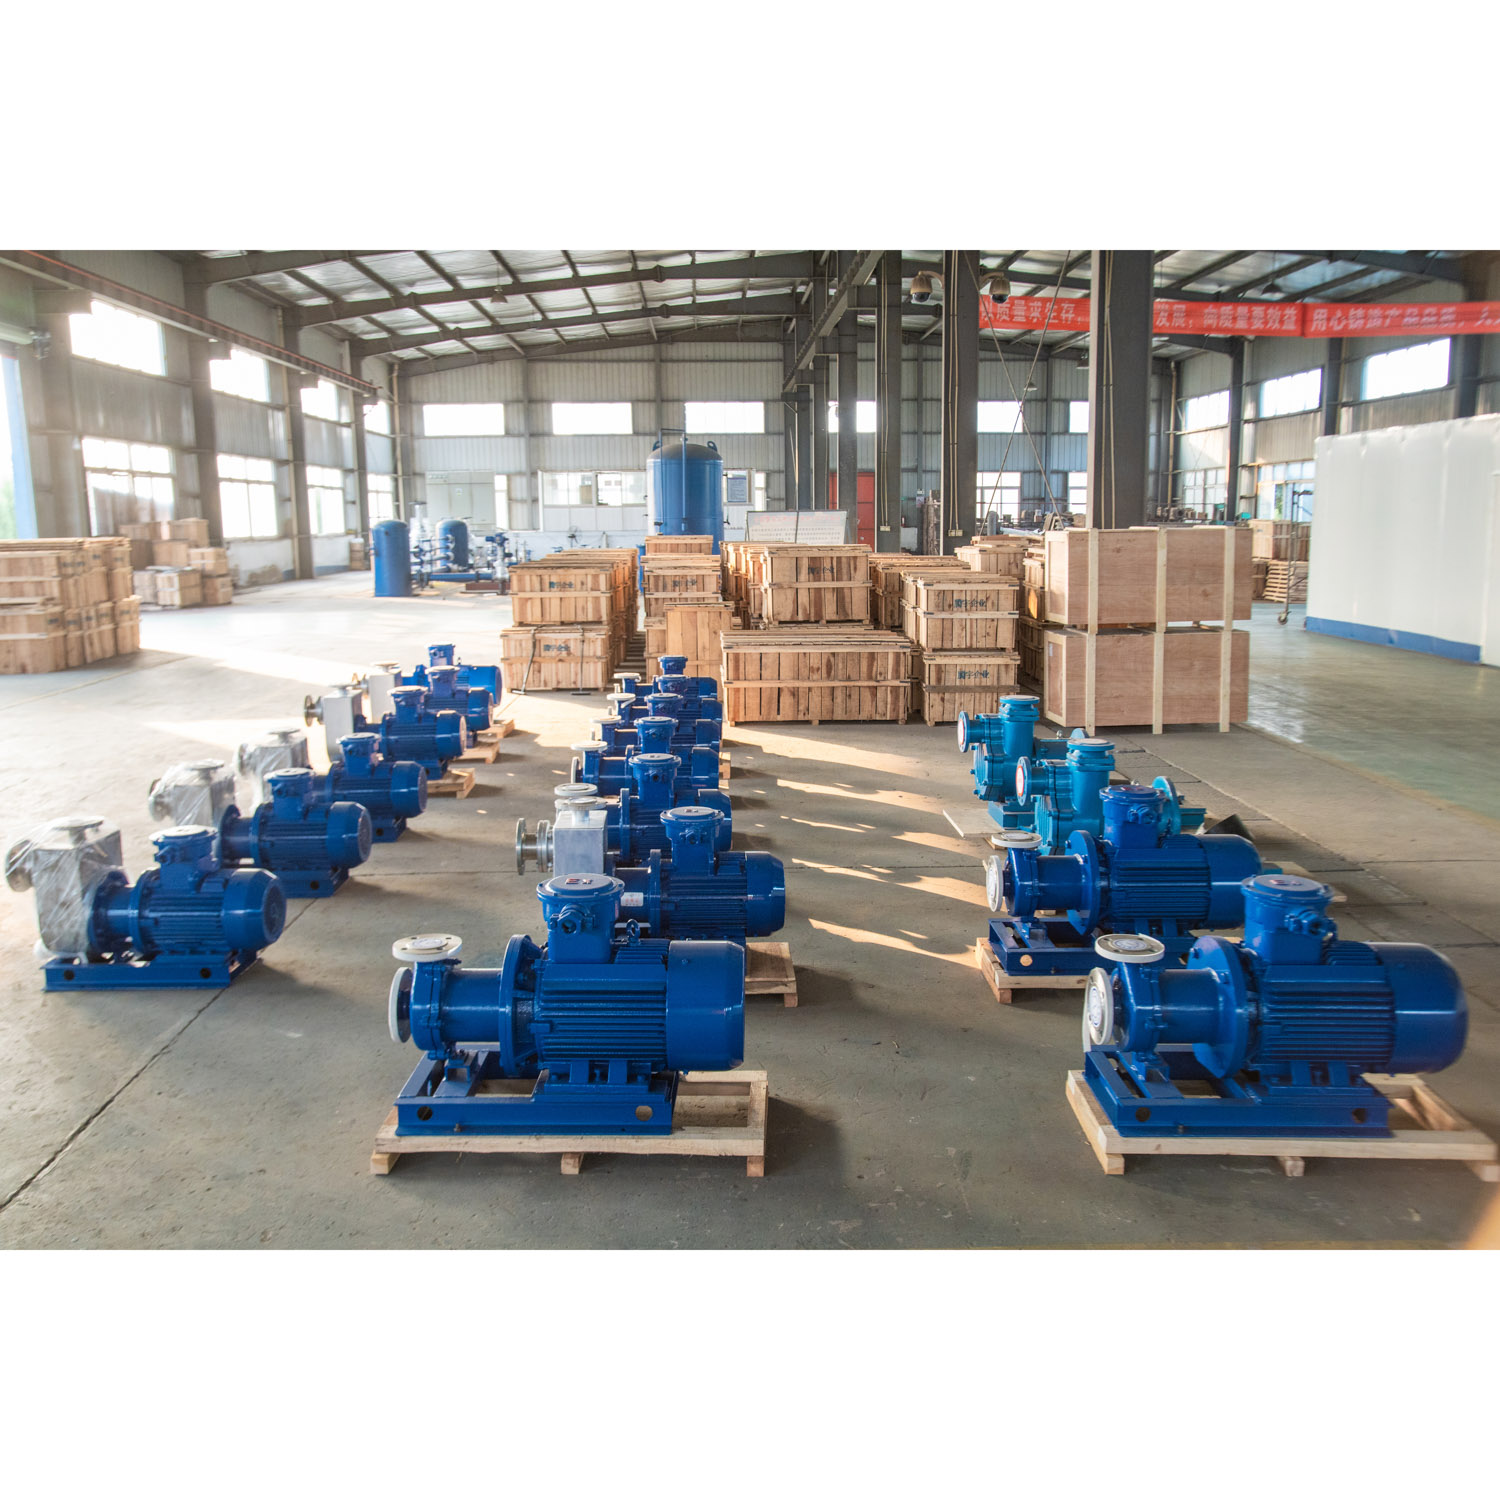 ZX Self priming Mechanical Seal Centrifugal Pumps